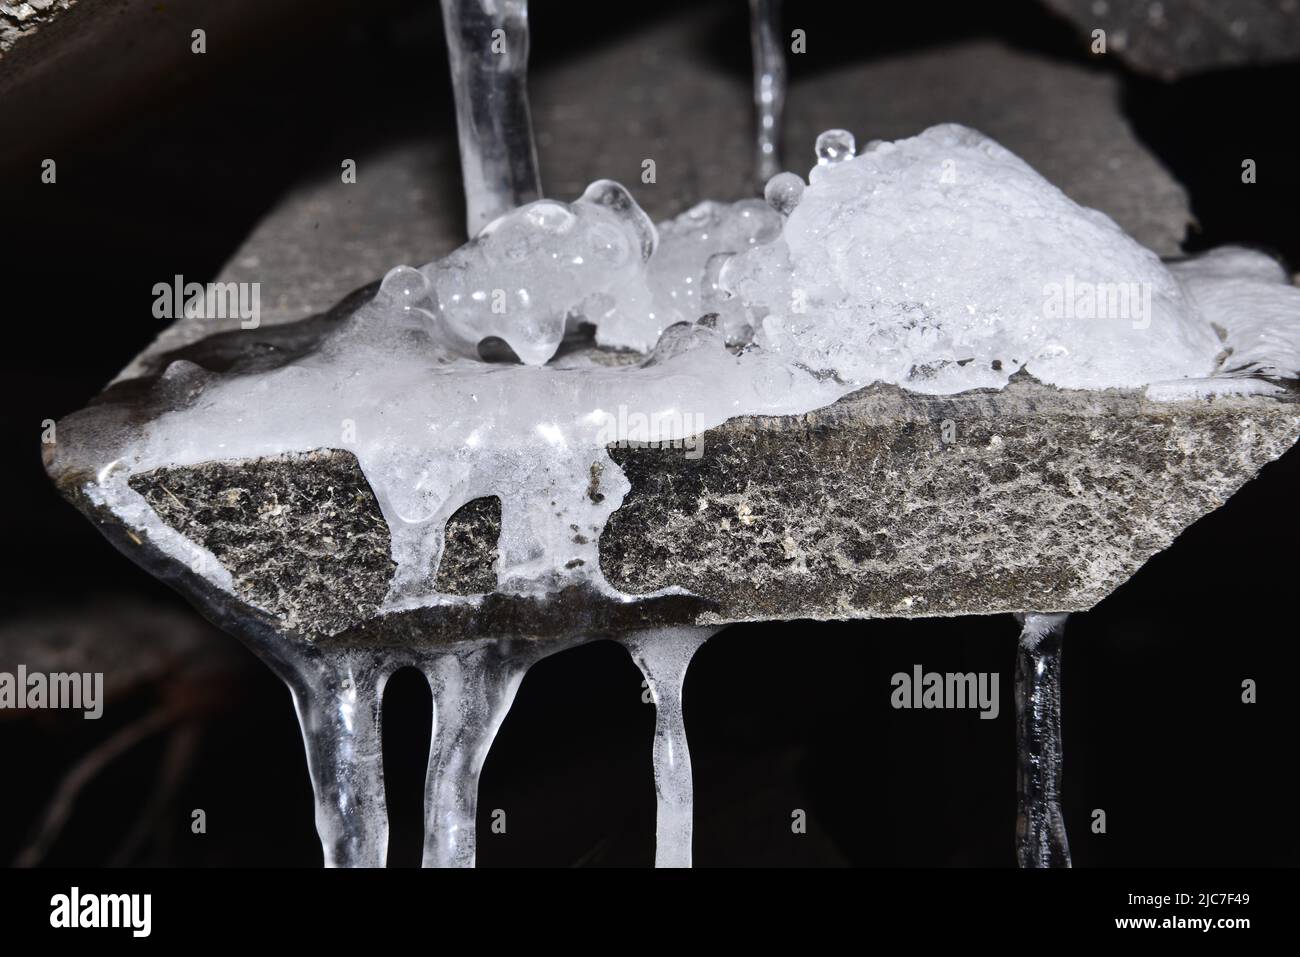 The water on the roof that froze in the low temperature. Stock Photo